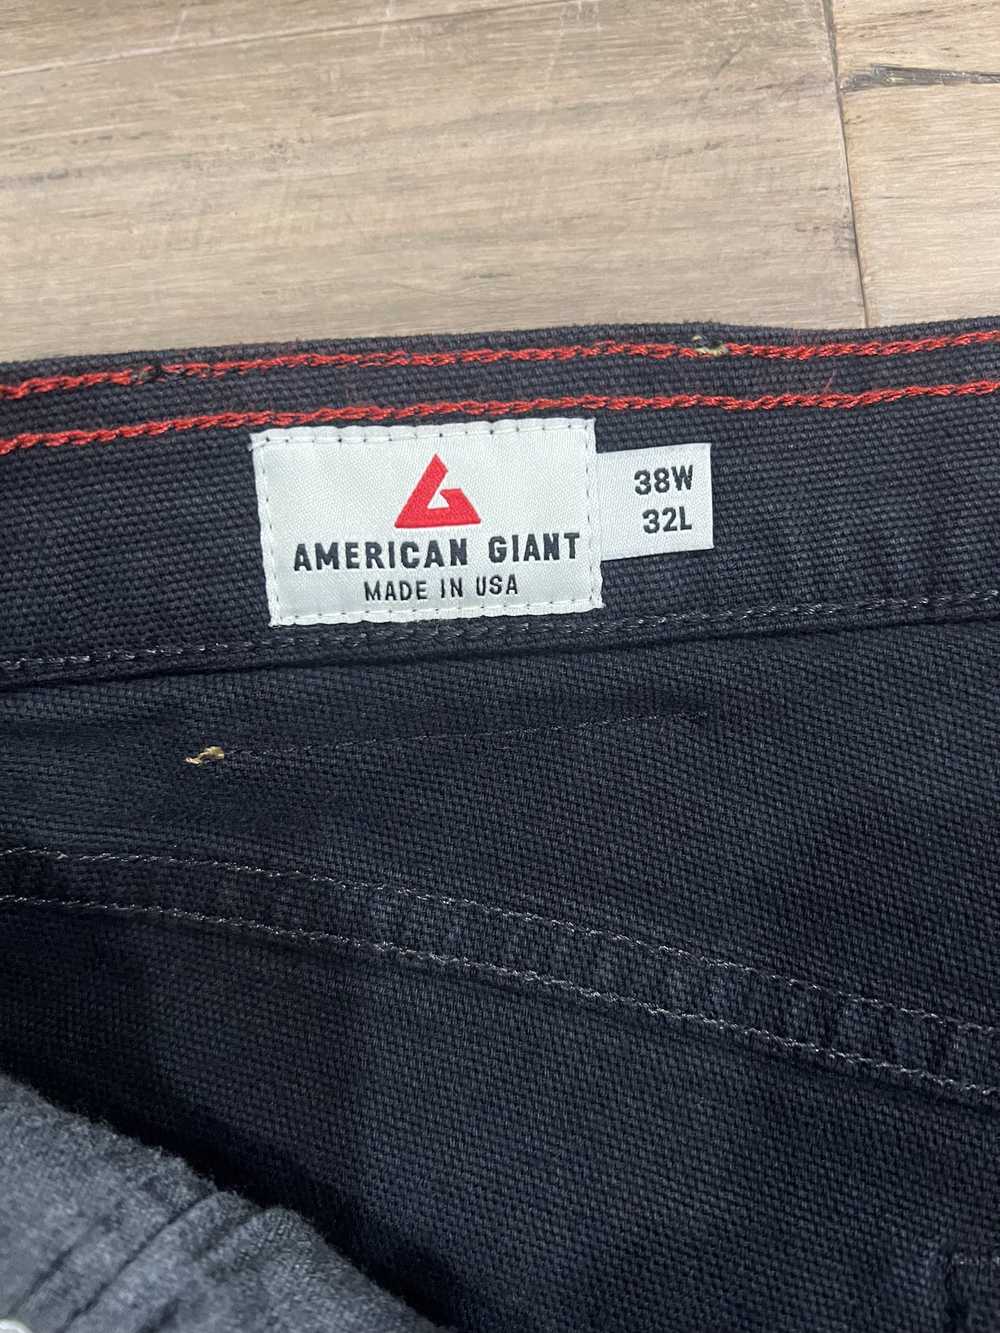 American Giant American Giant Canvas Work Pant - image 5